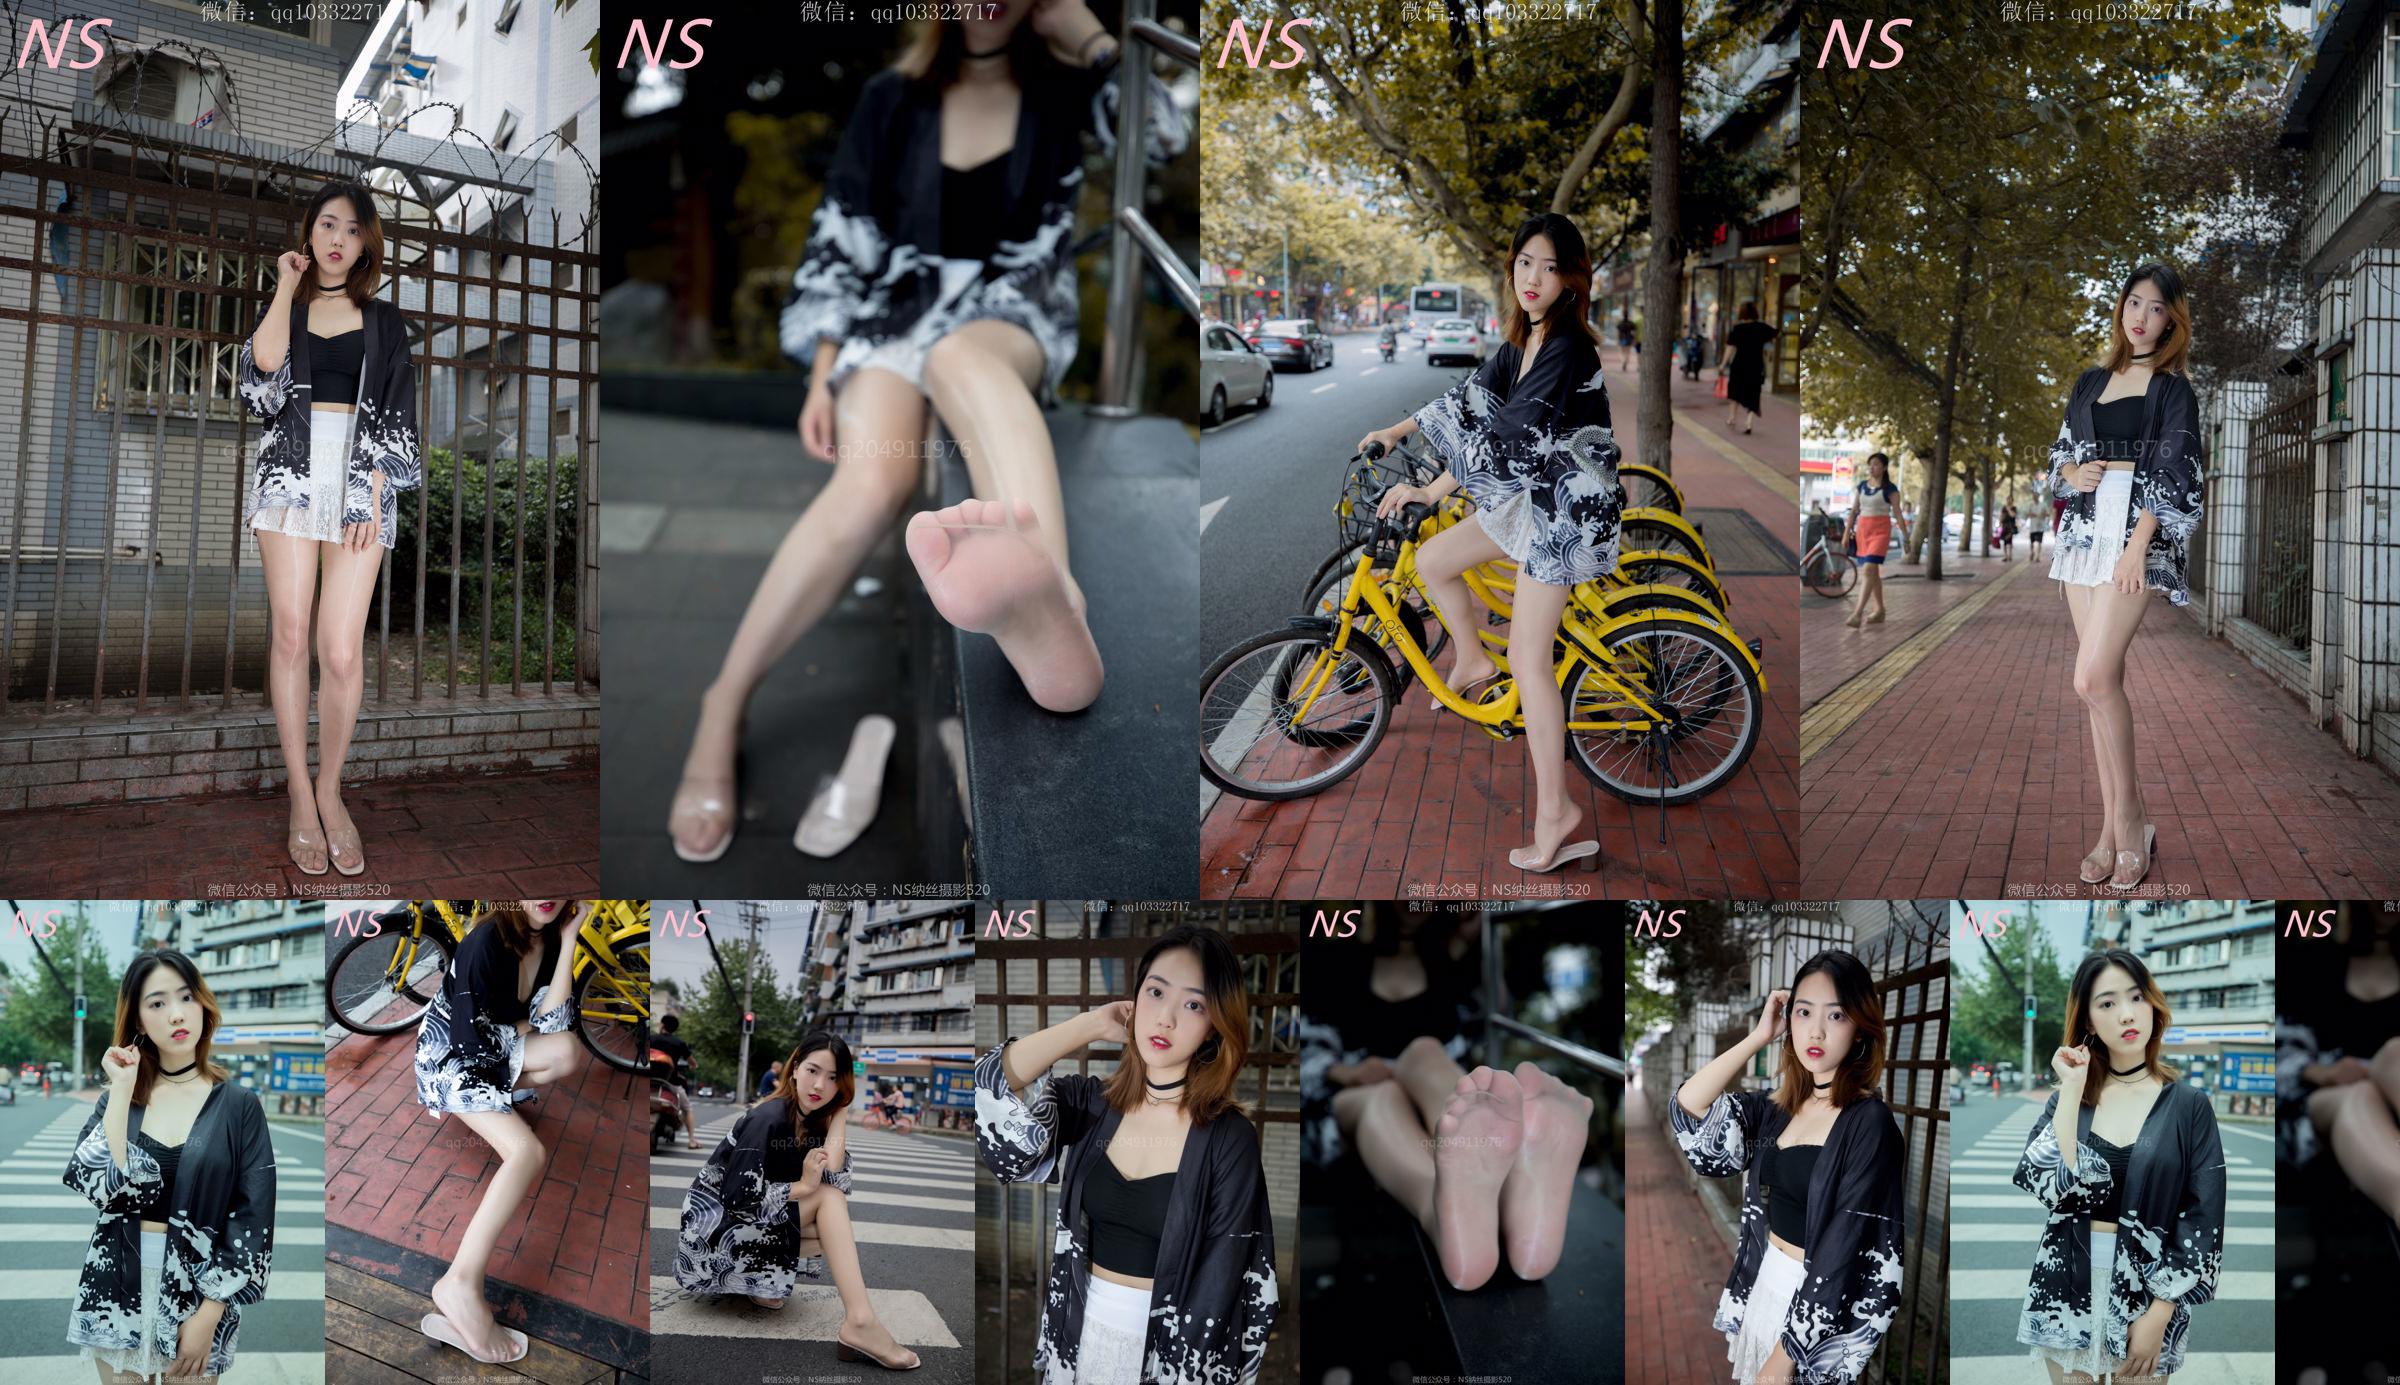 Man Wen "A Trip to a Tricycle in Flesh-colored Stockings and Beautiful Legs" [Nass Photography] No.f64144 Page 1